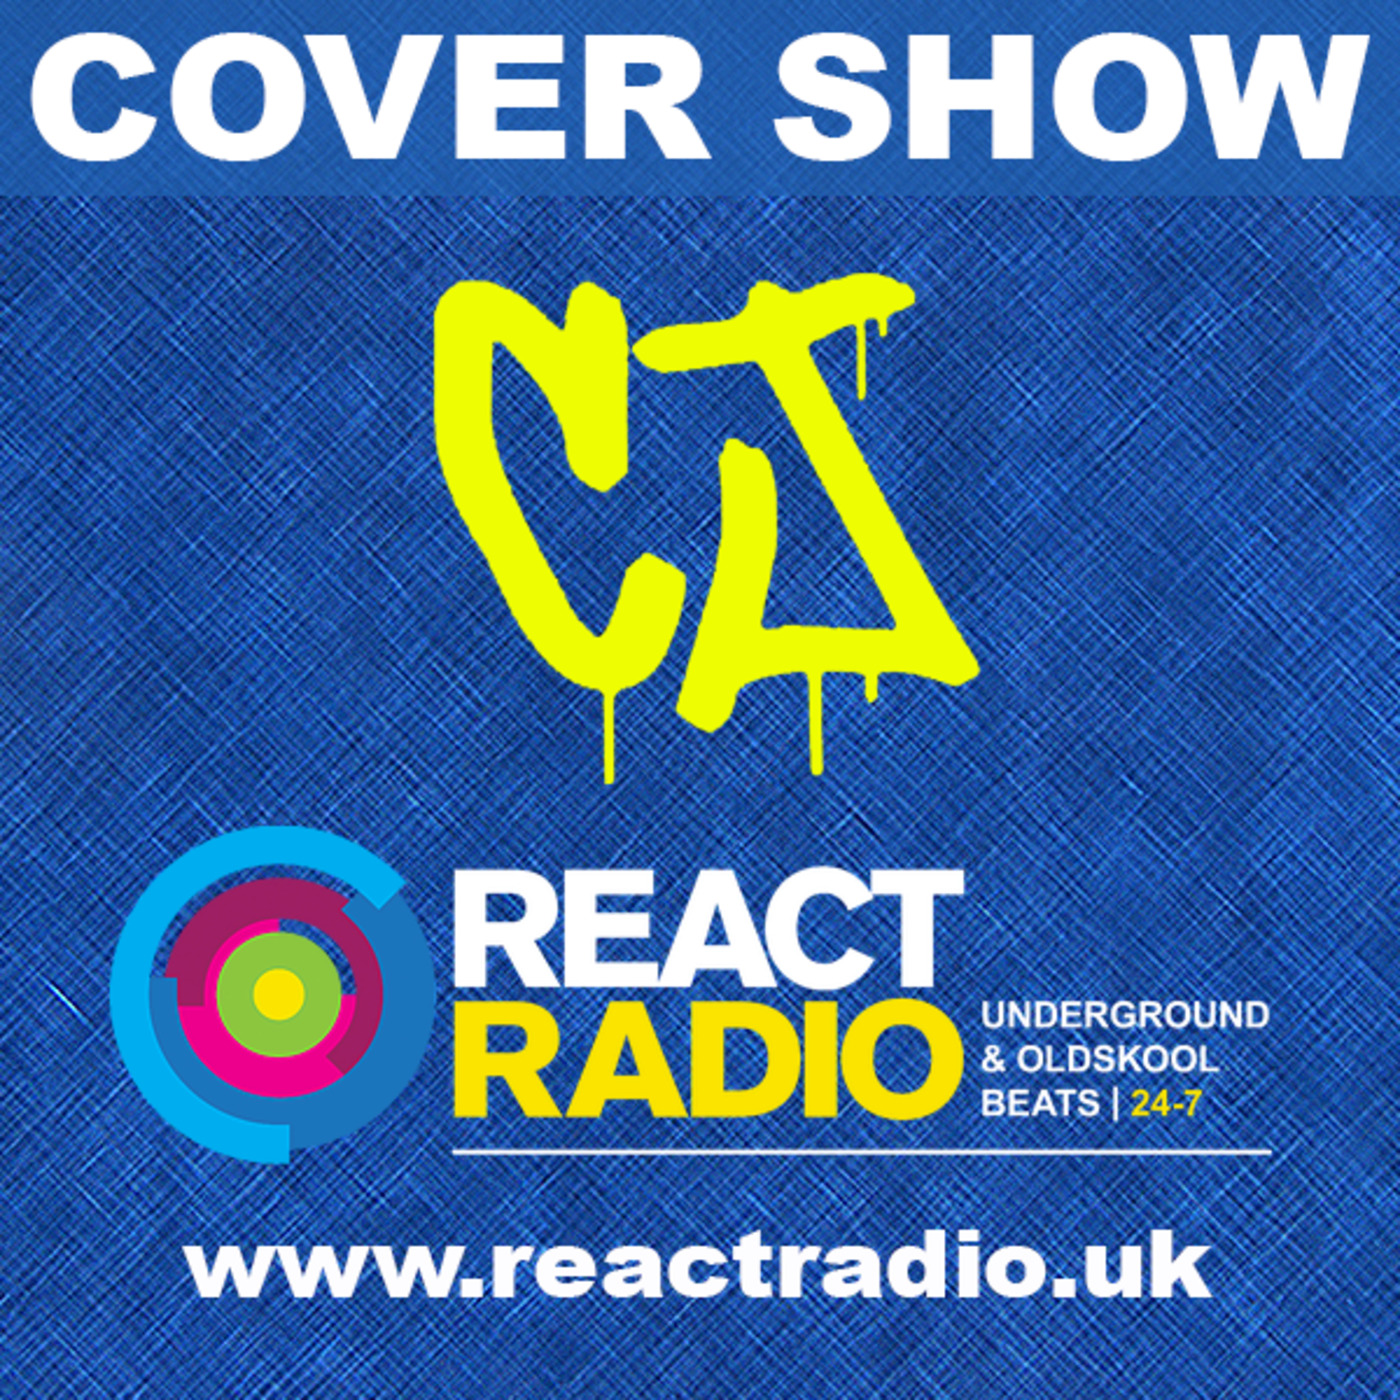 CJ Huckerby - The After Friday Night Live Show - React Radio 09/09/16 (OLD SKOOL DANCE)